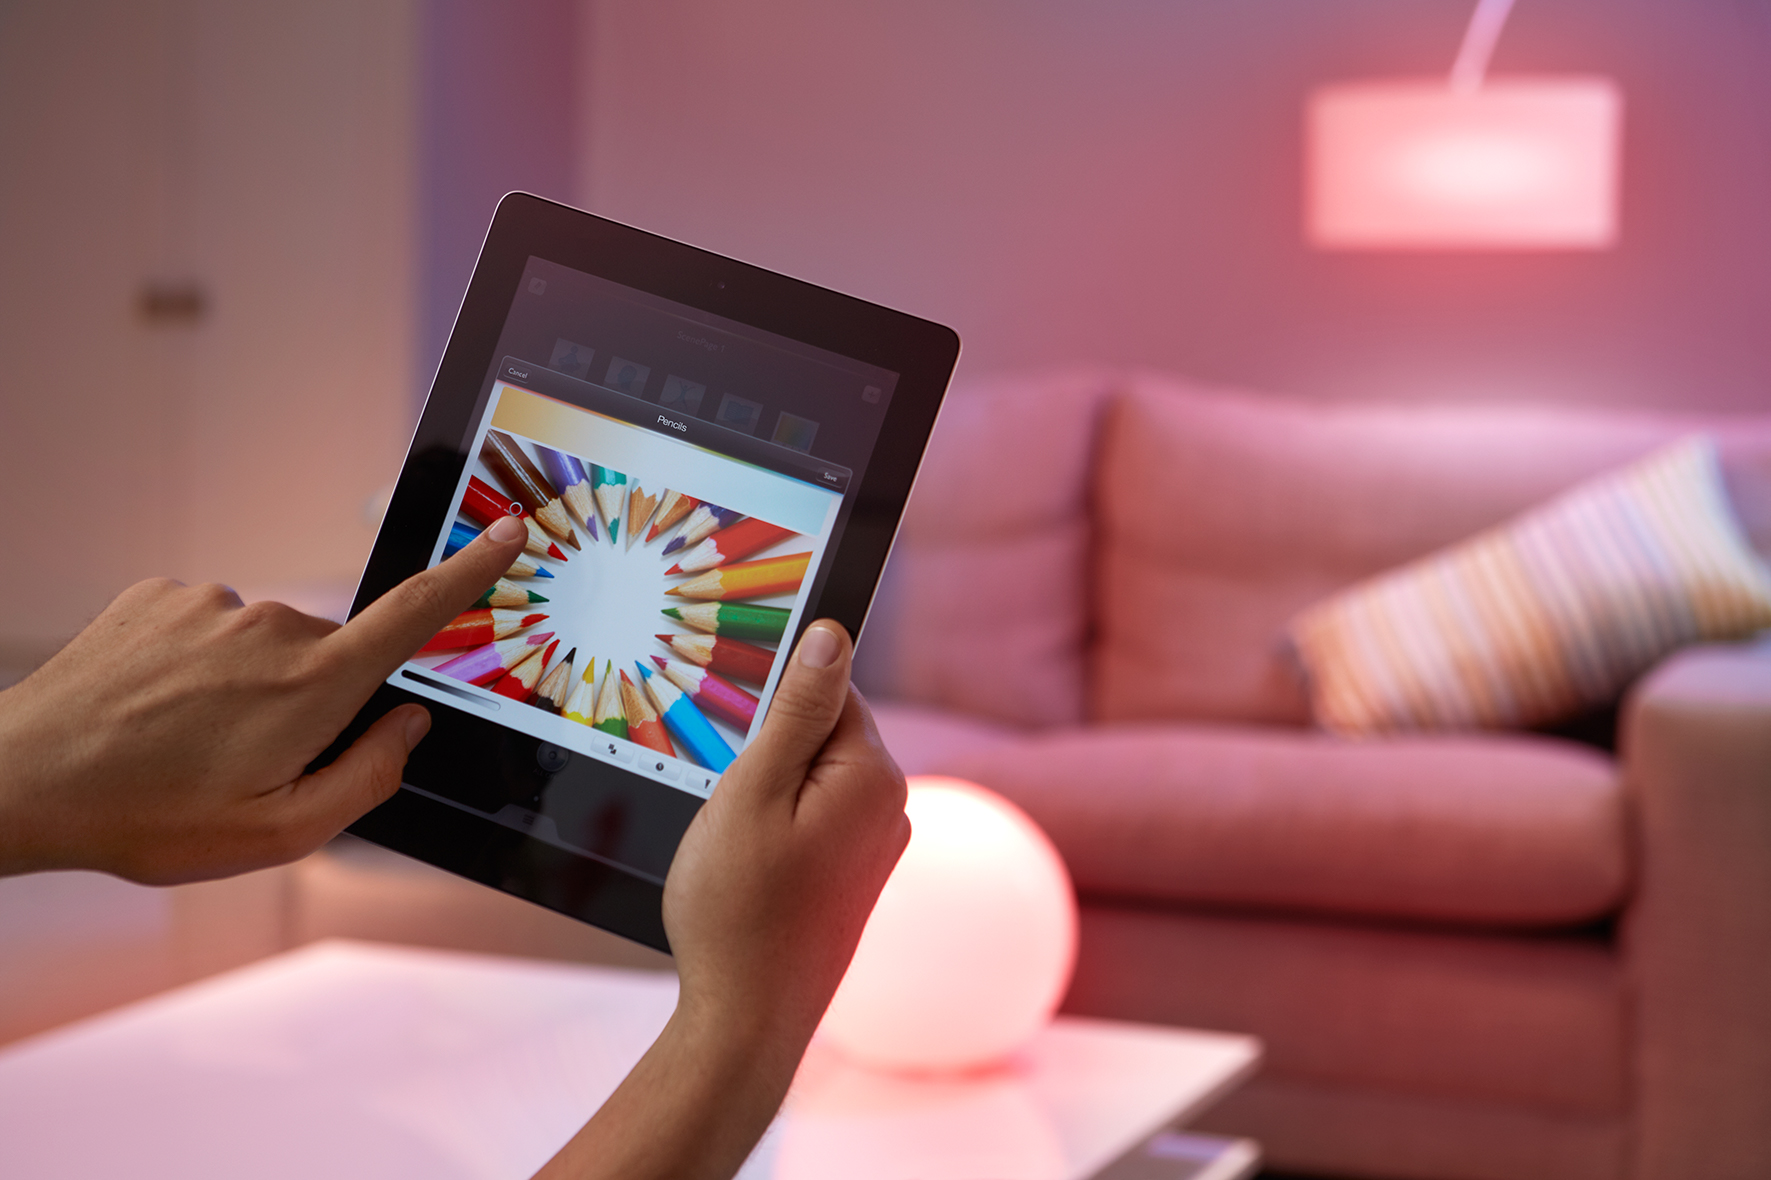 Philips Hue smart control - Image copyright Philips